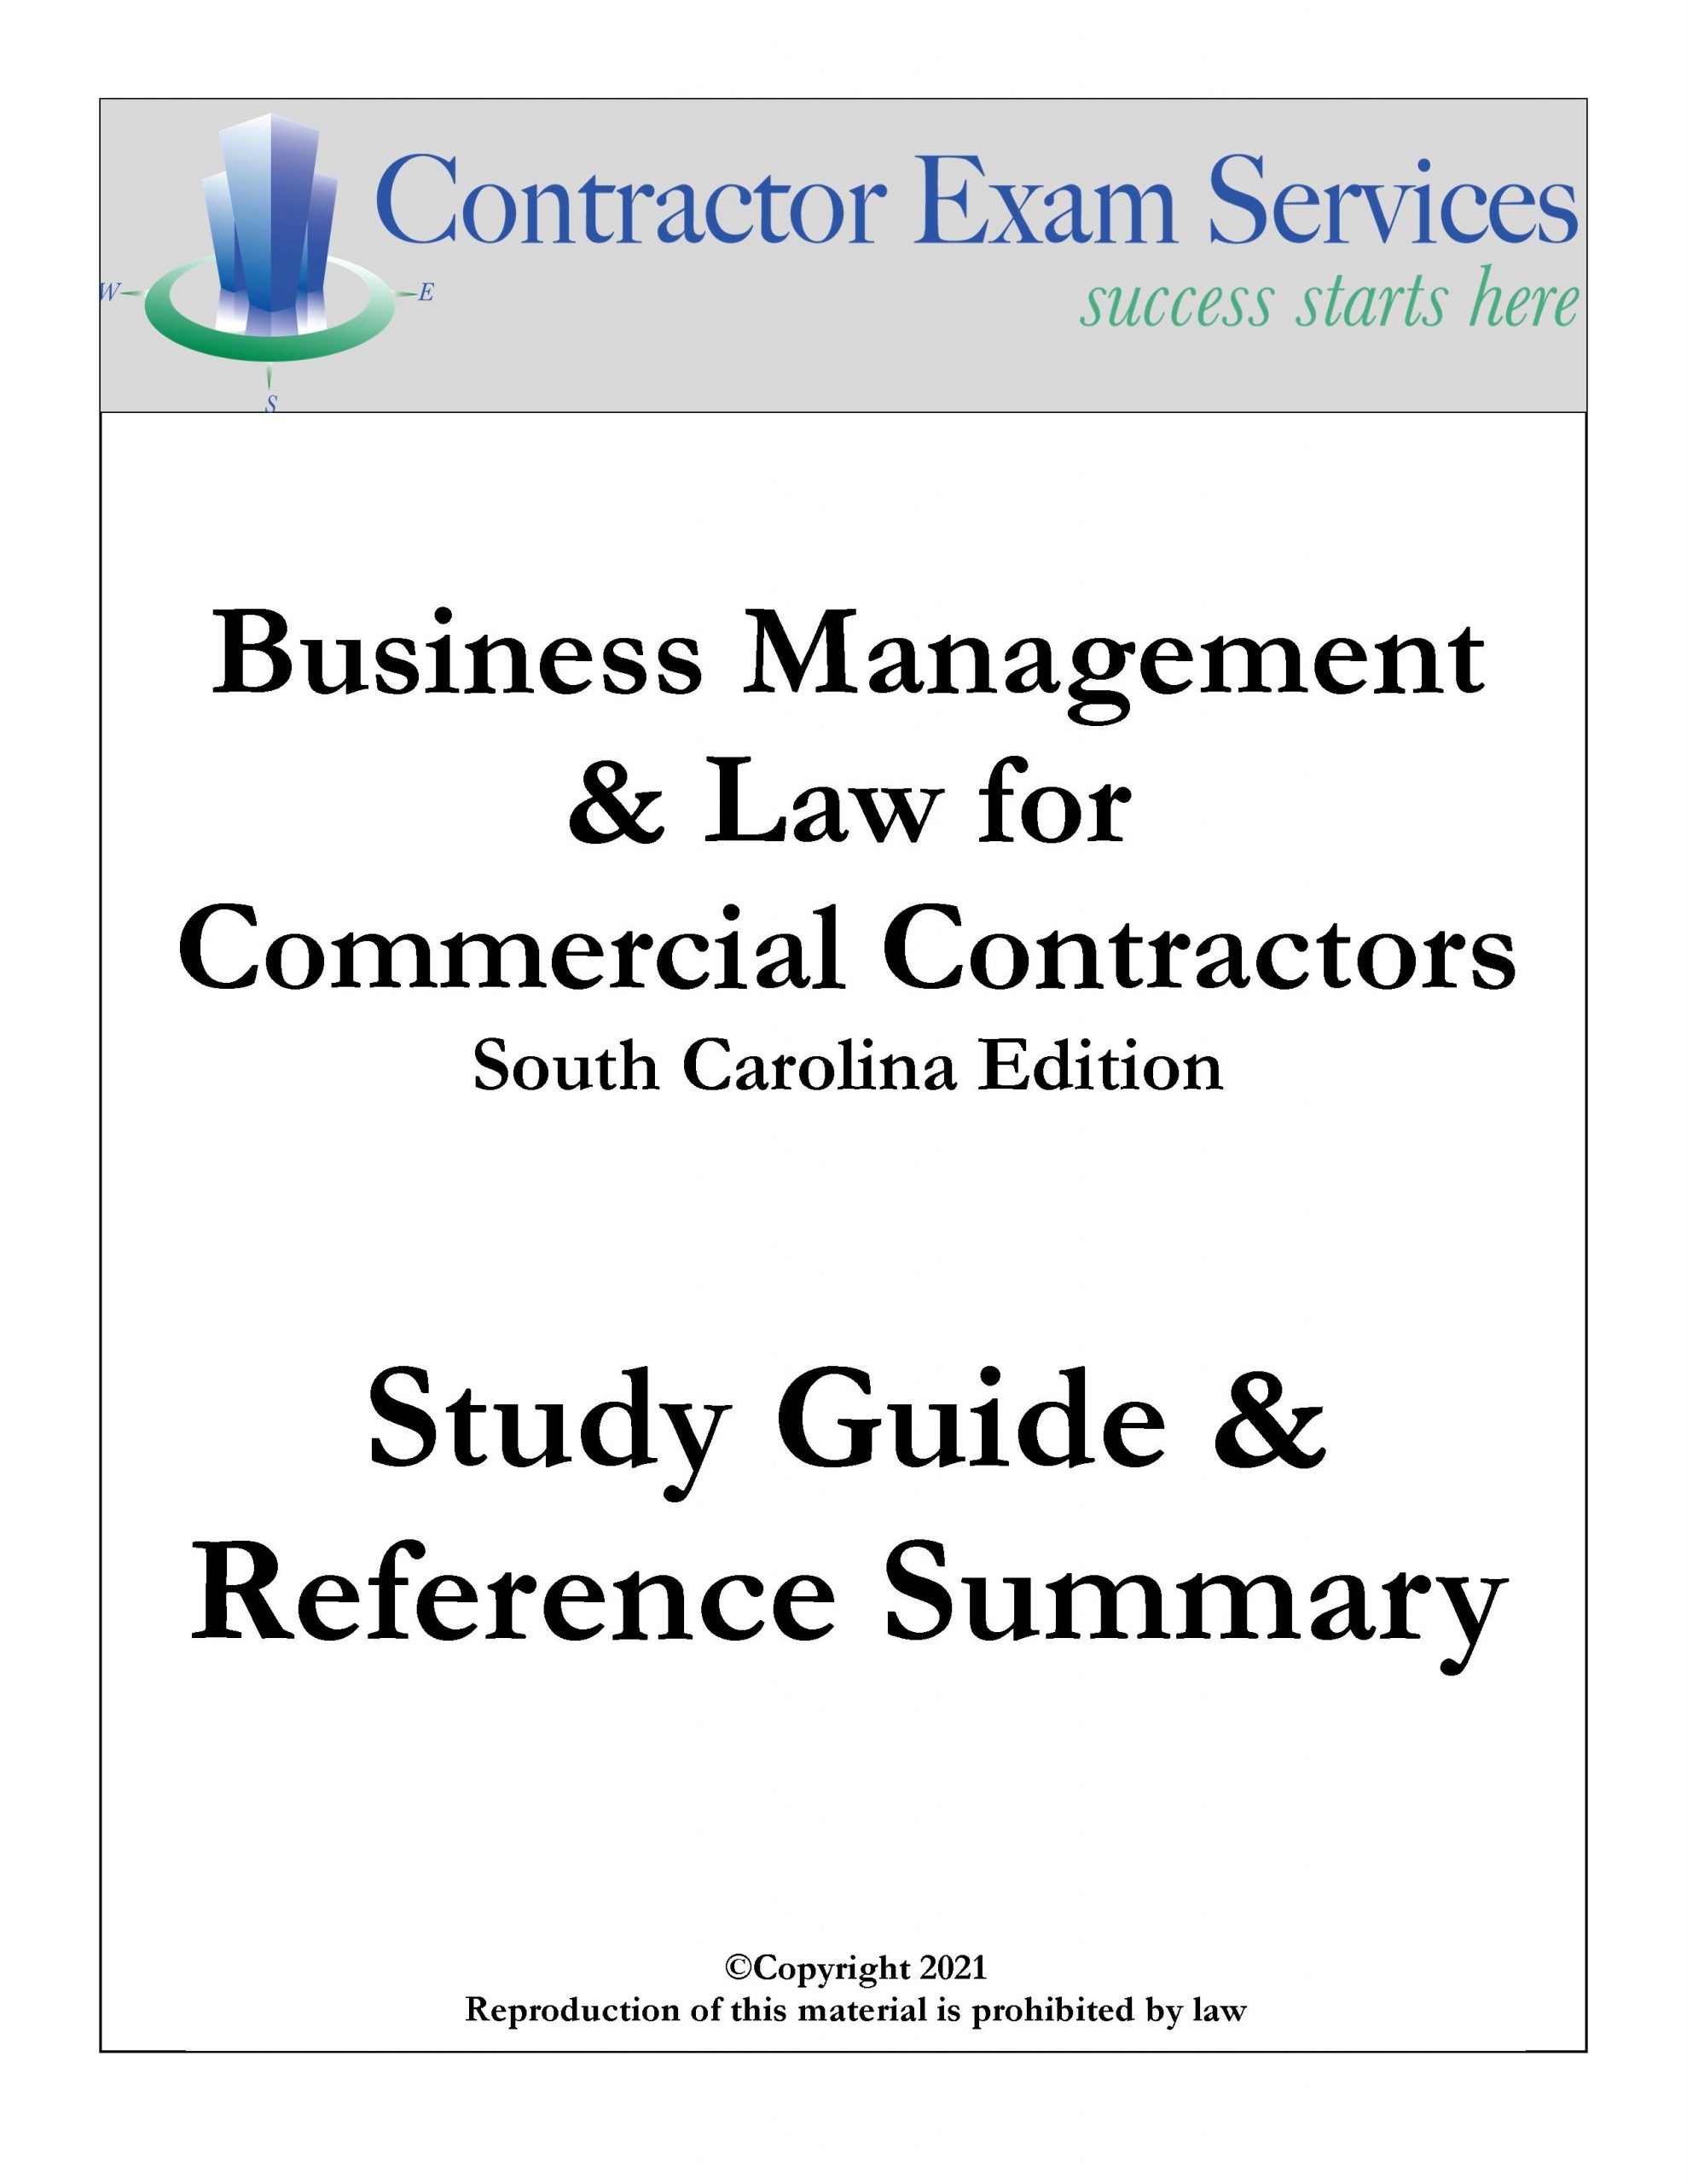 SC Business Management & Law for Commercial Contractors Study Guide